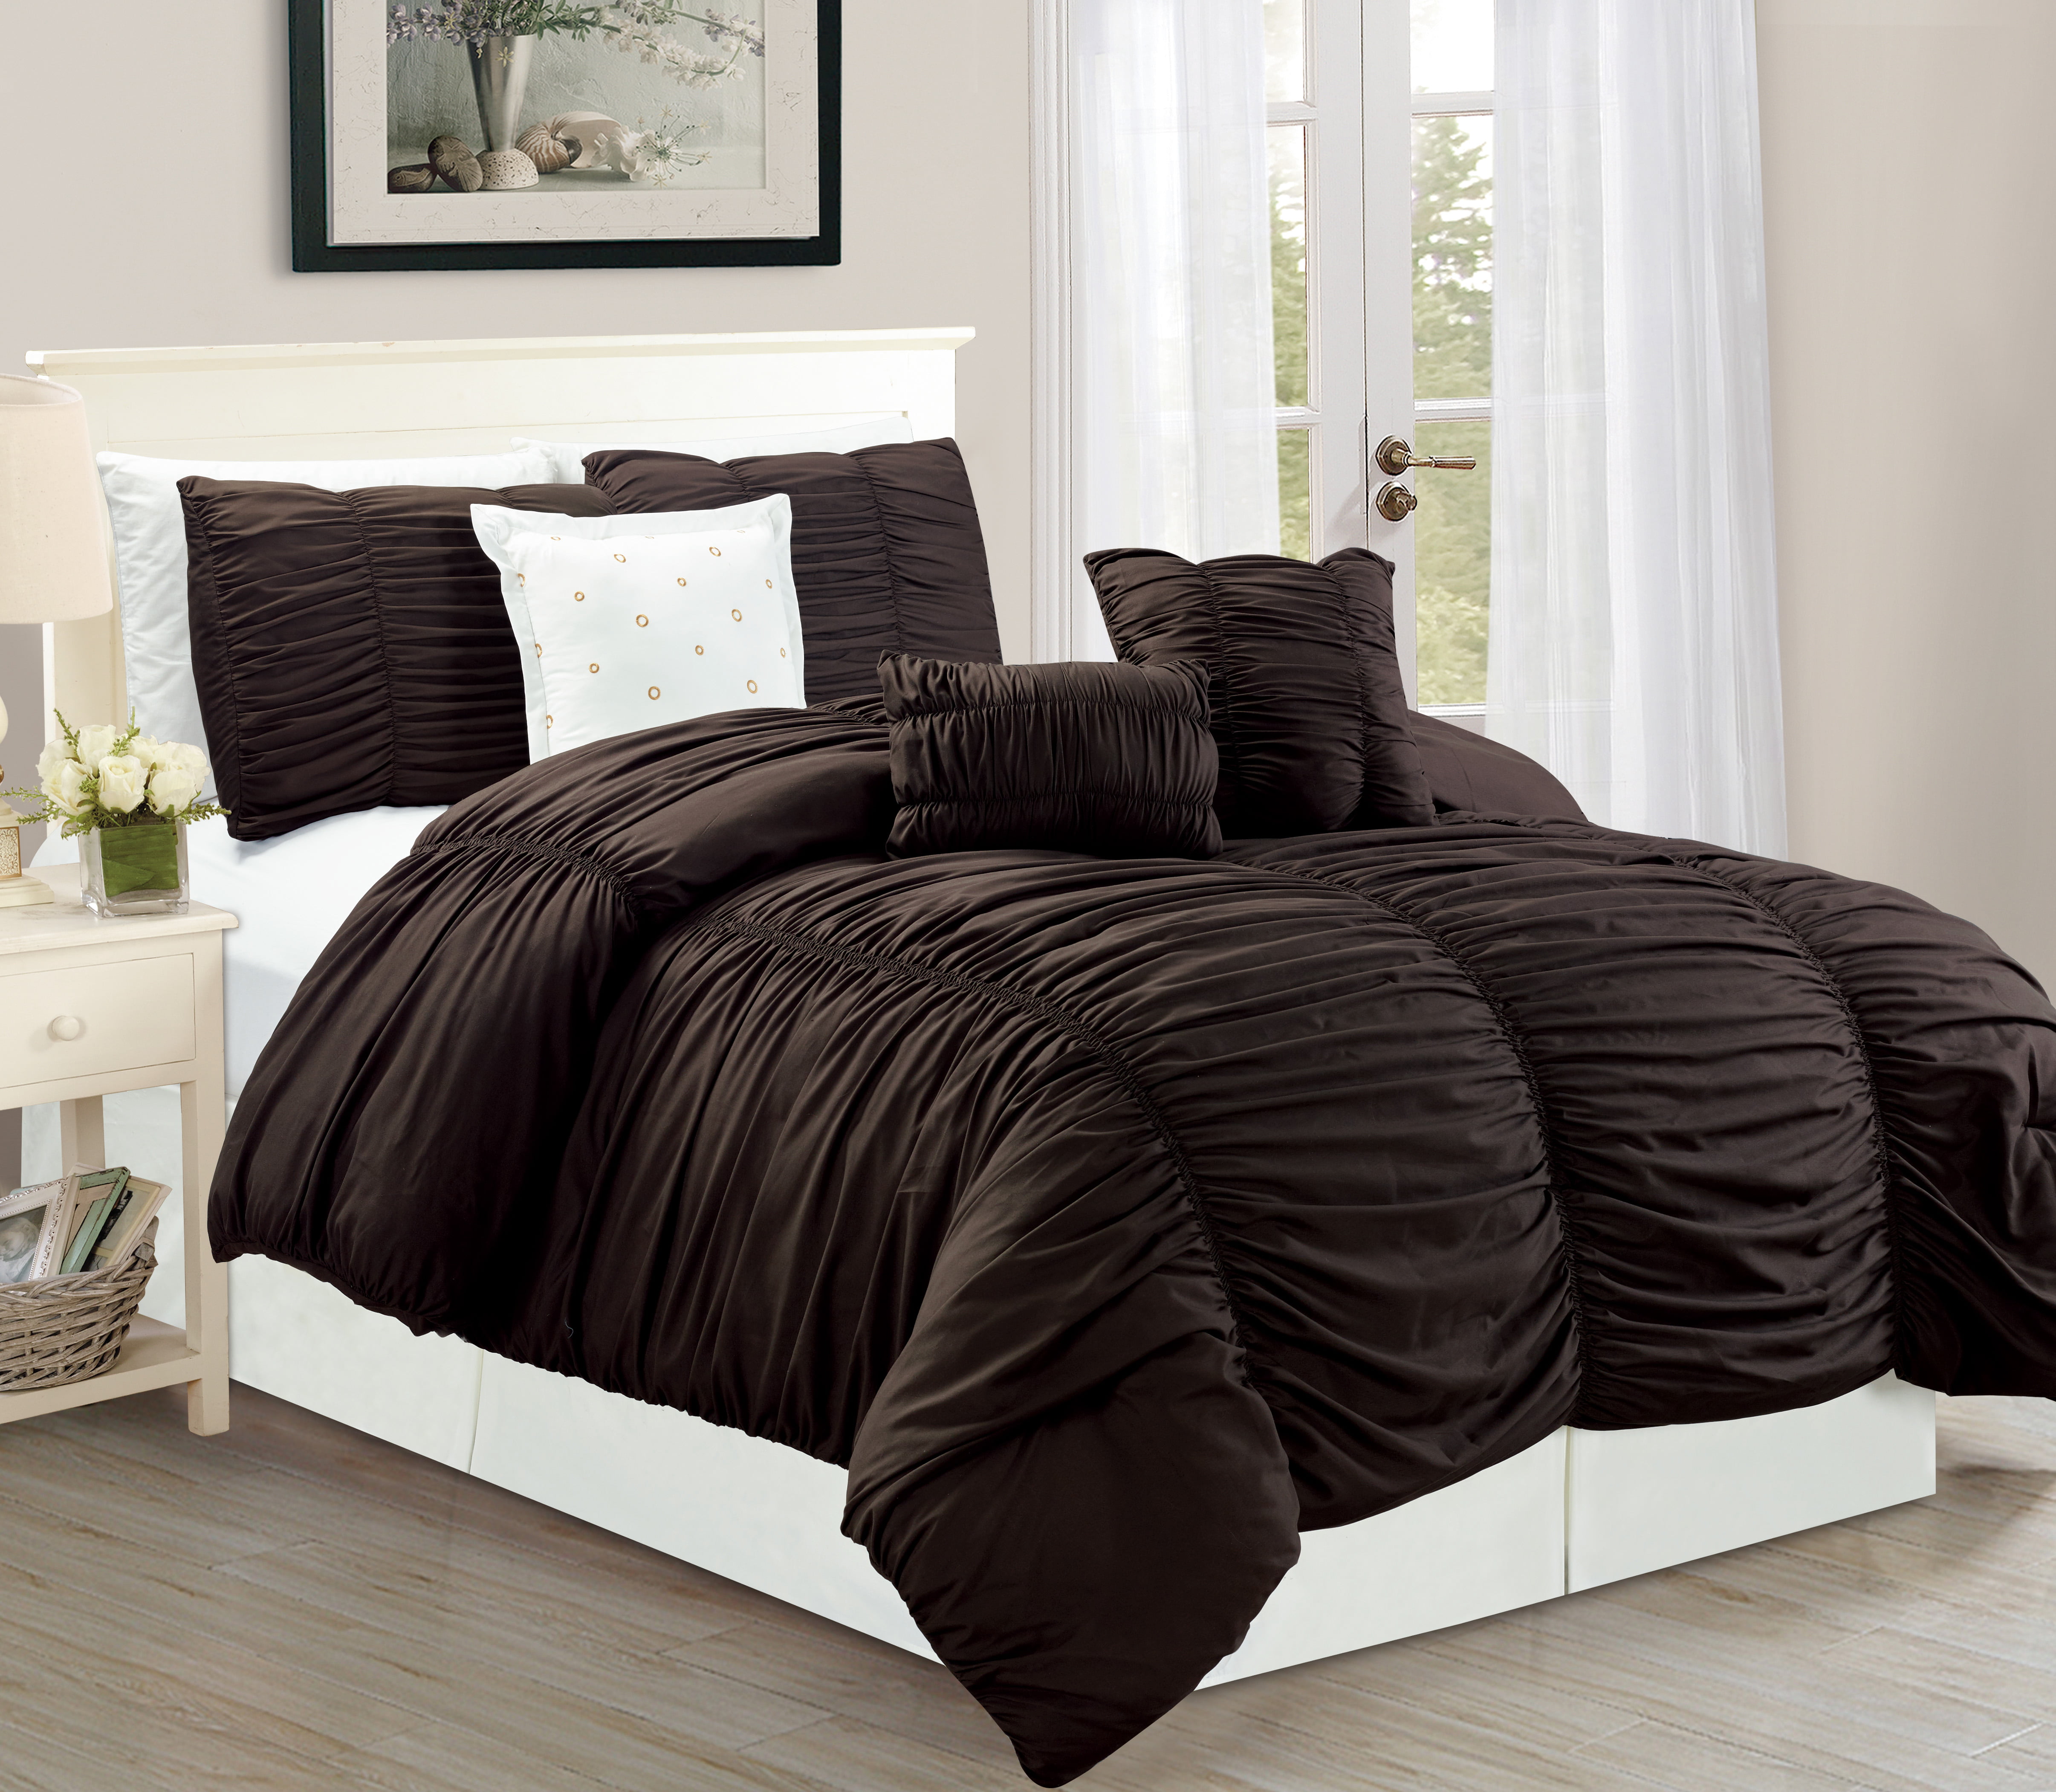 Wpm 7 Piece Royal Chocolate Brown Ruched Comforter Set Elegant Bed In A Bag Luxurious King Size Bedding Walmart Com Walmart Com